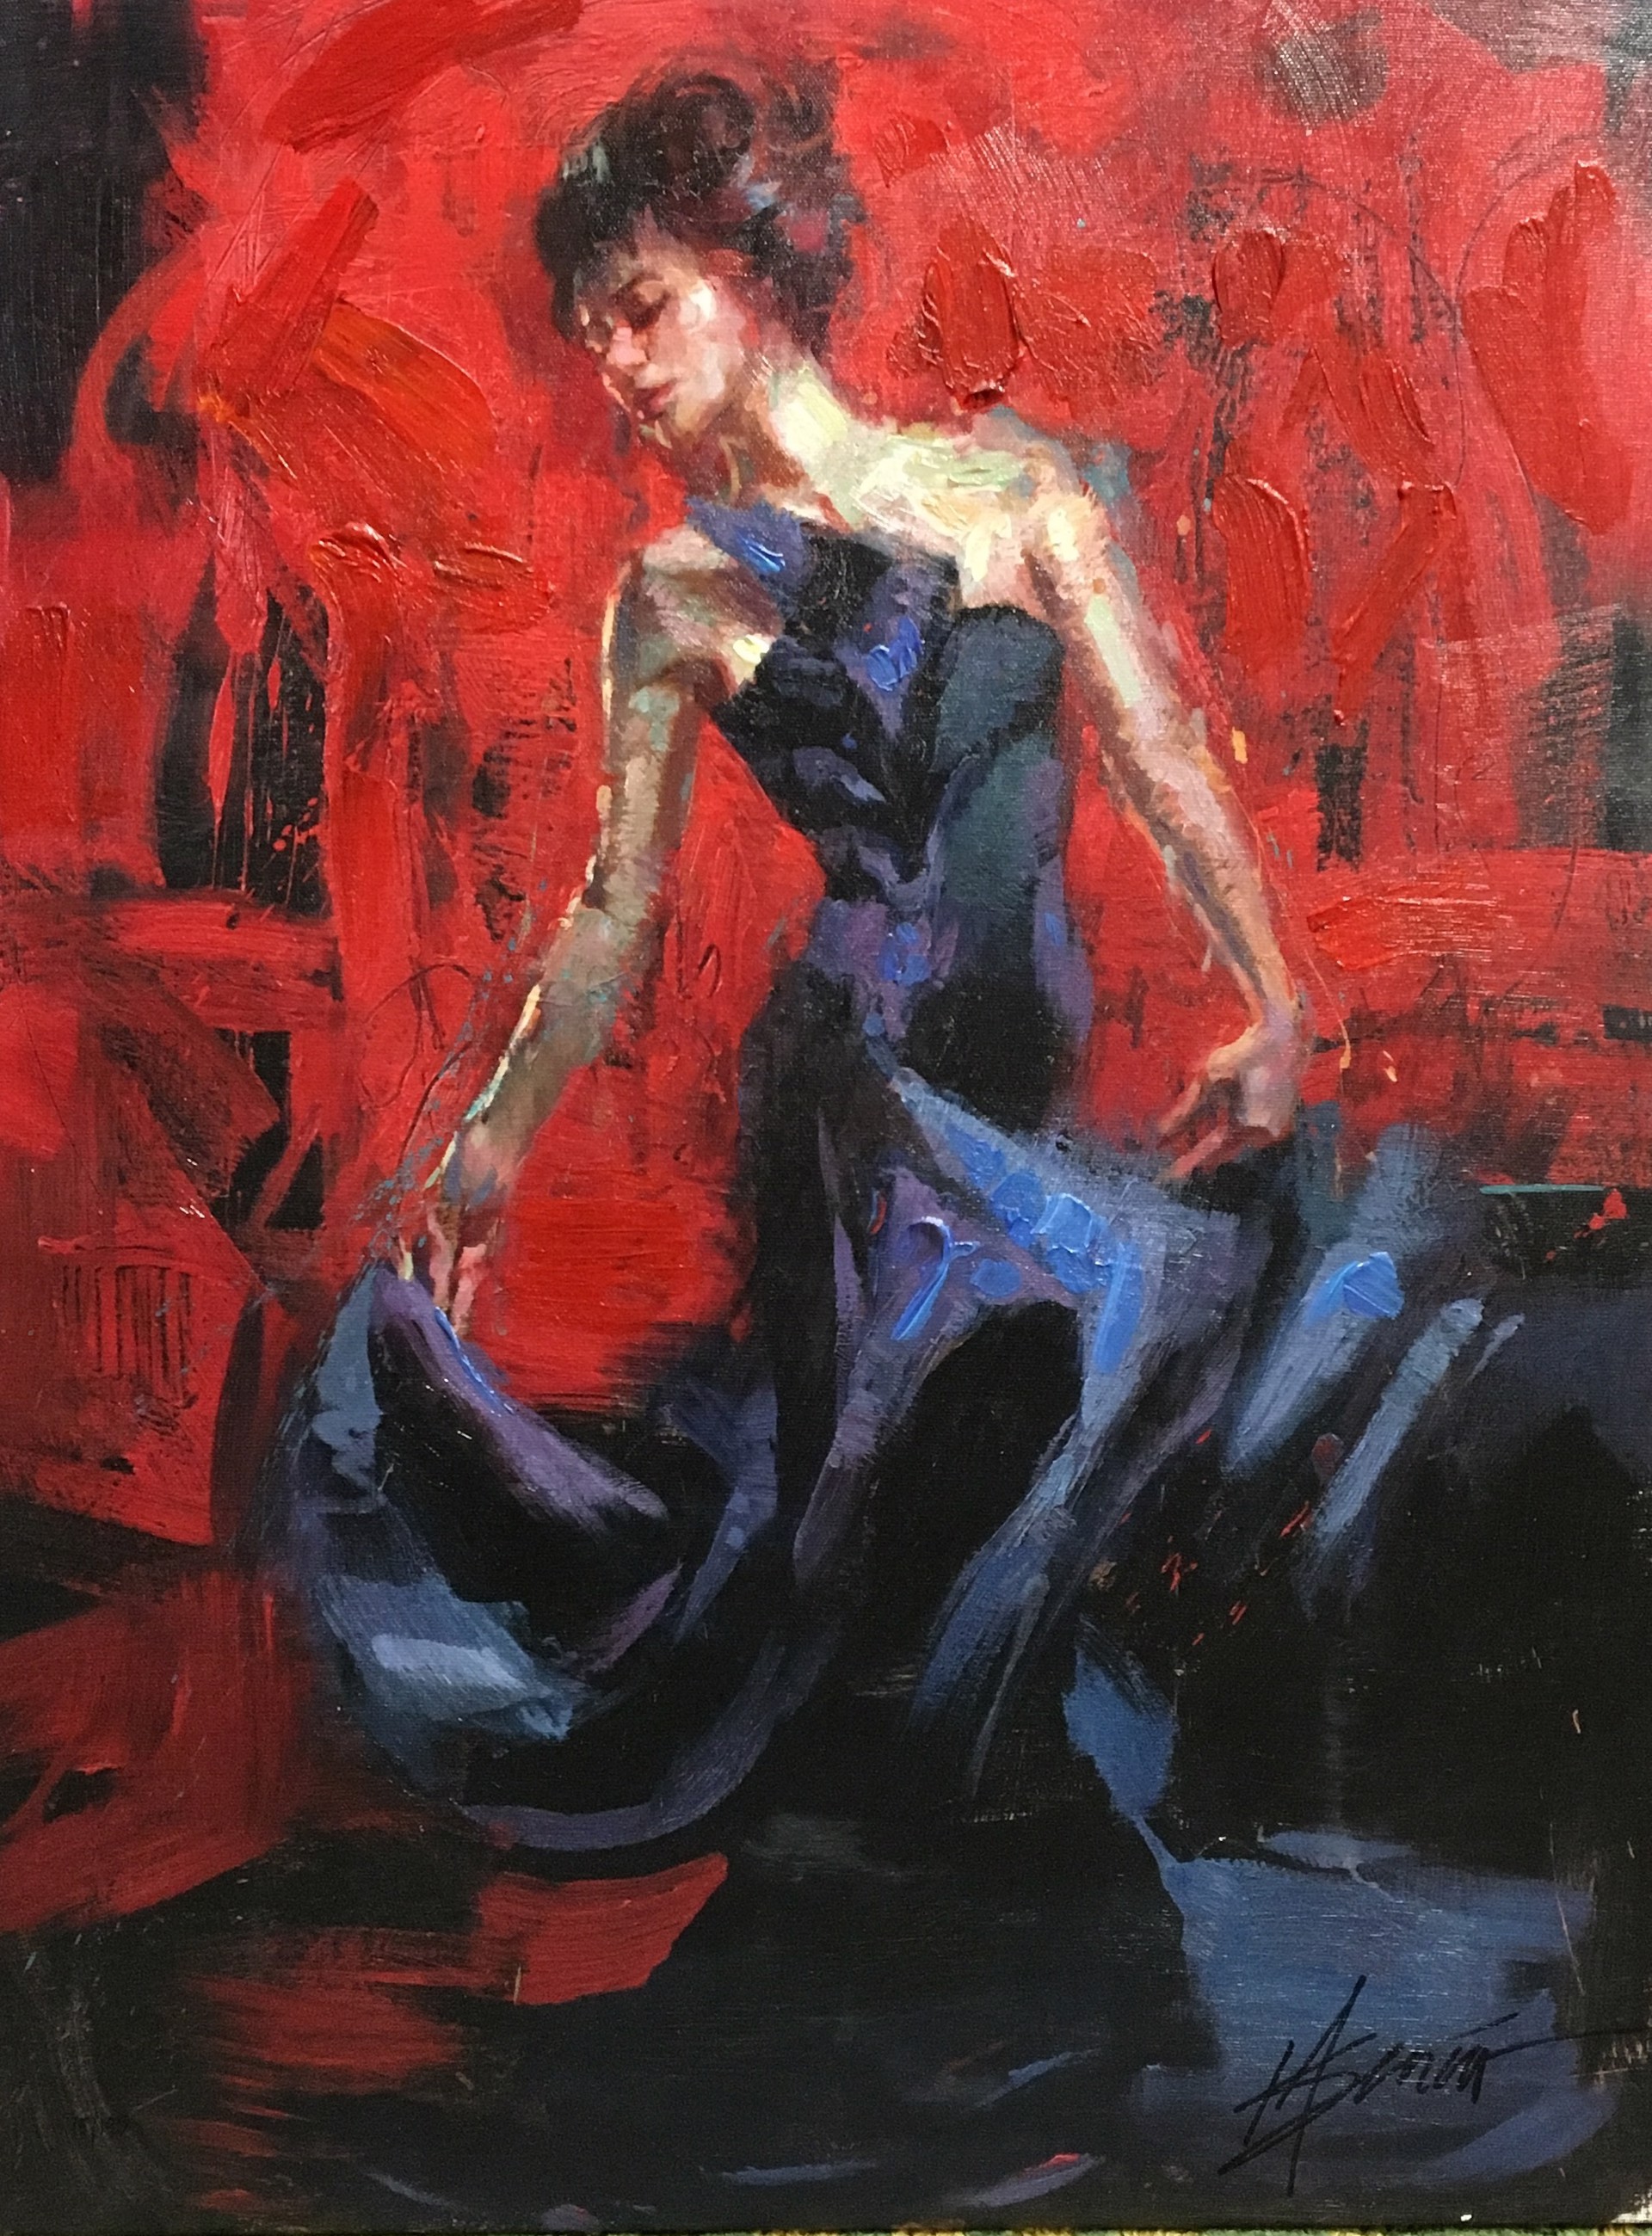 The Dancer by Henry Asencio